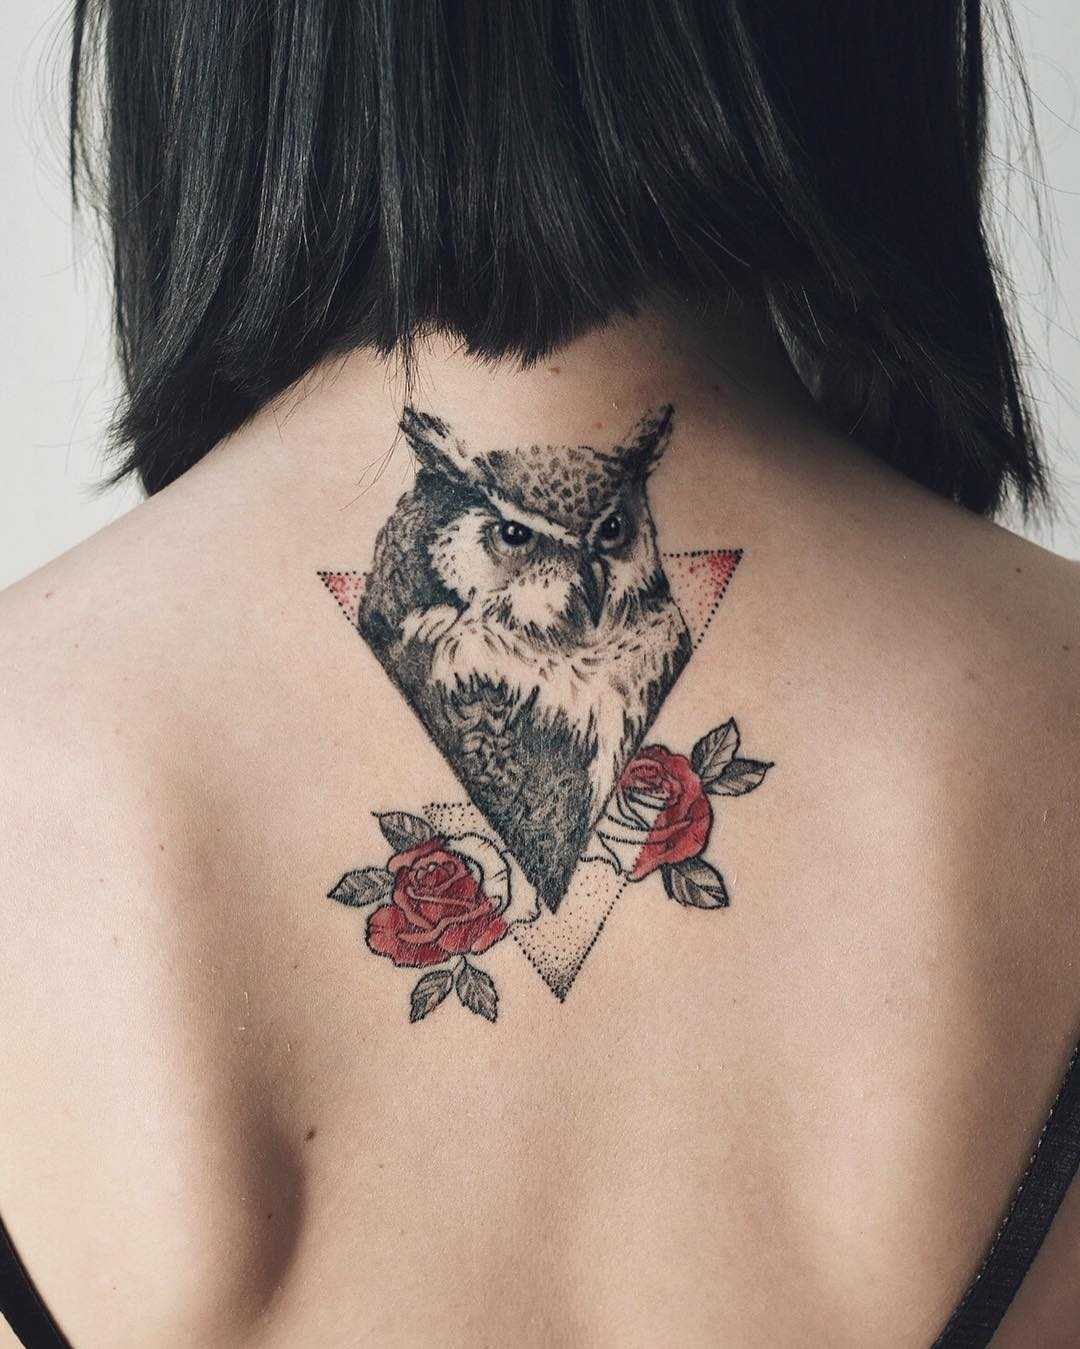 Owl and roses tattoo